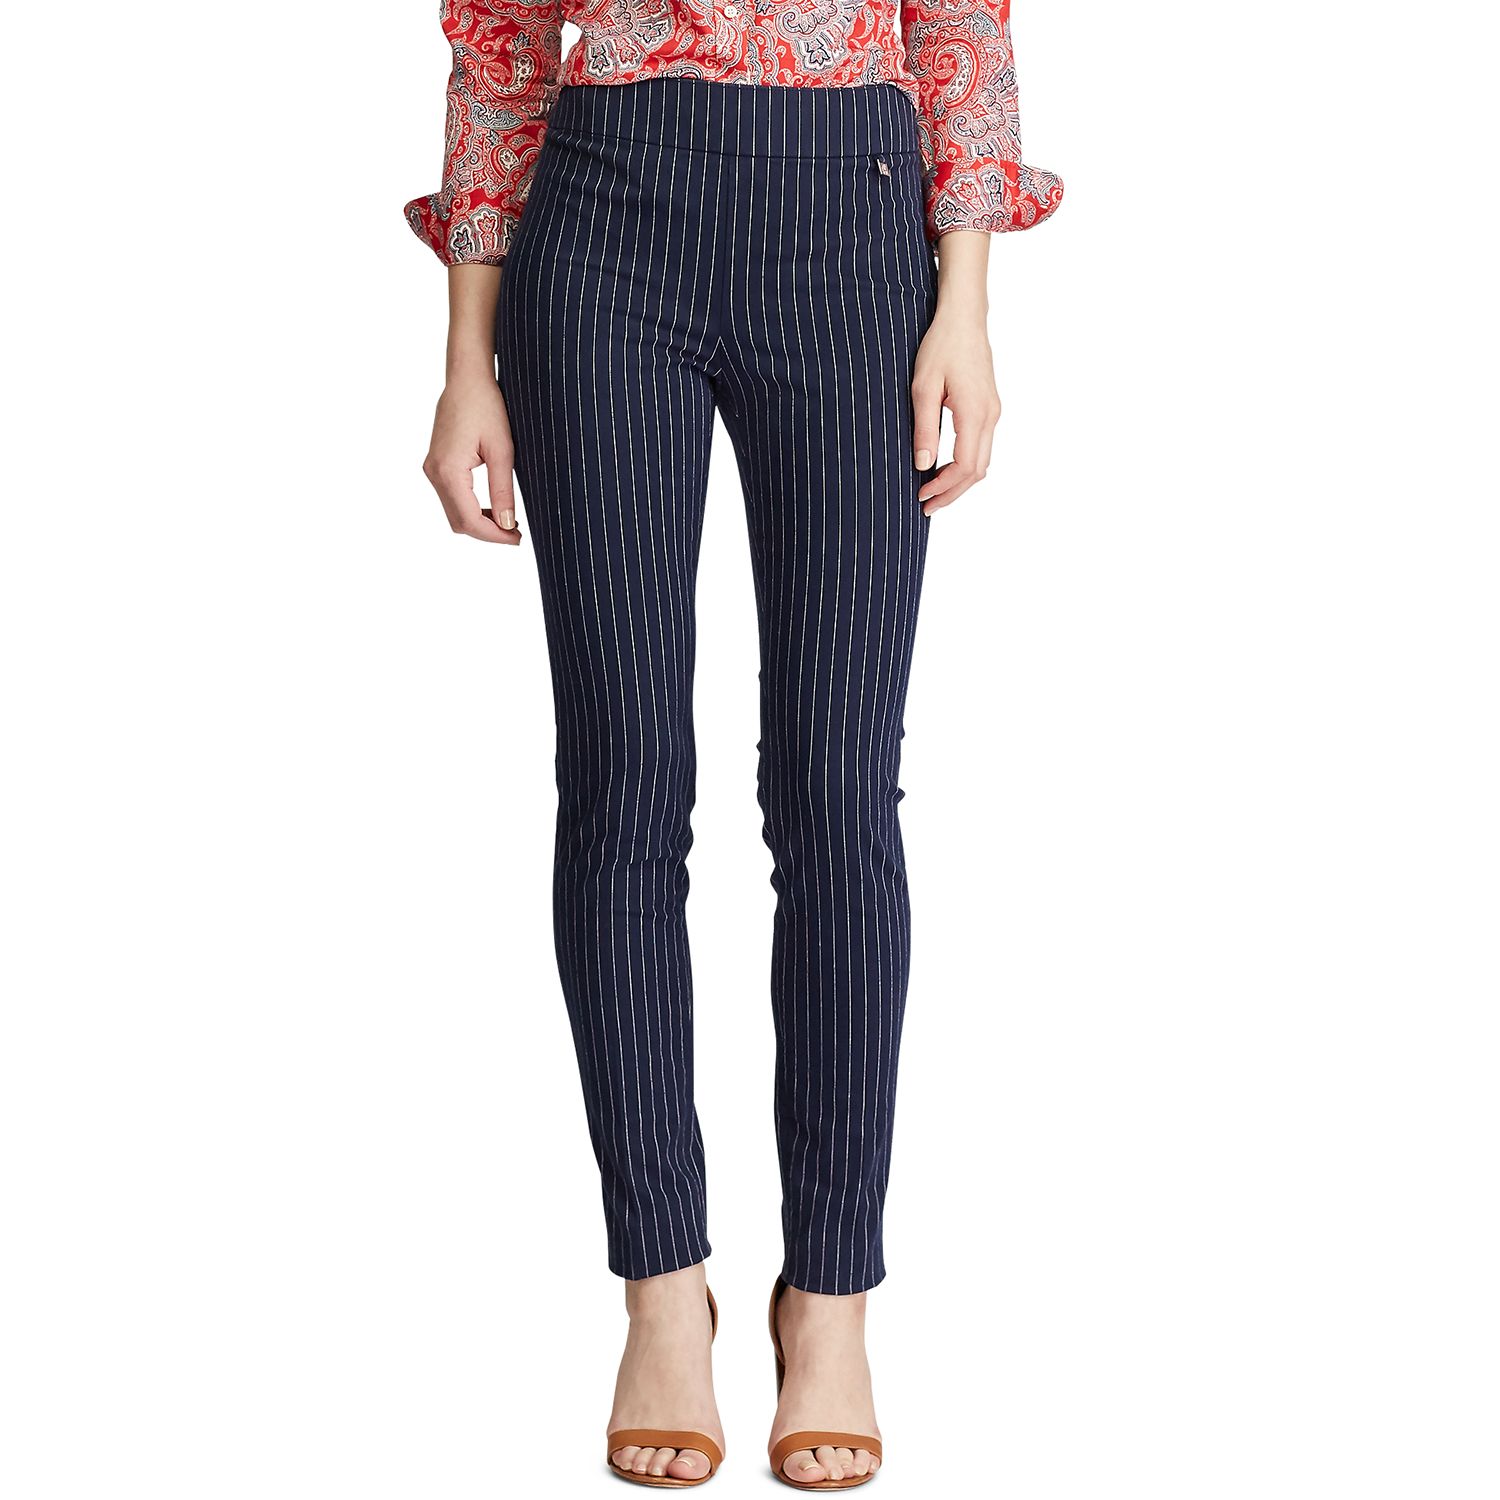 pinstripe pants womens outfit